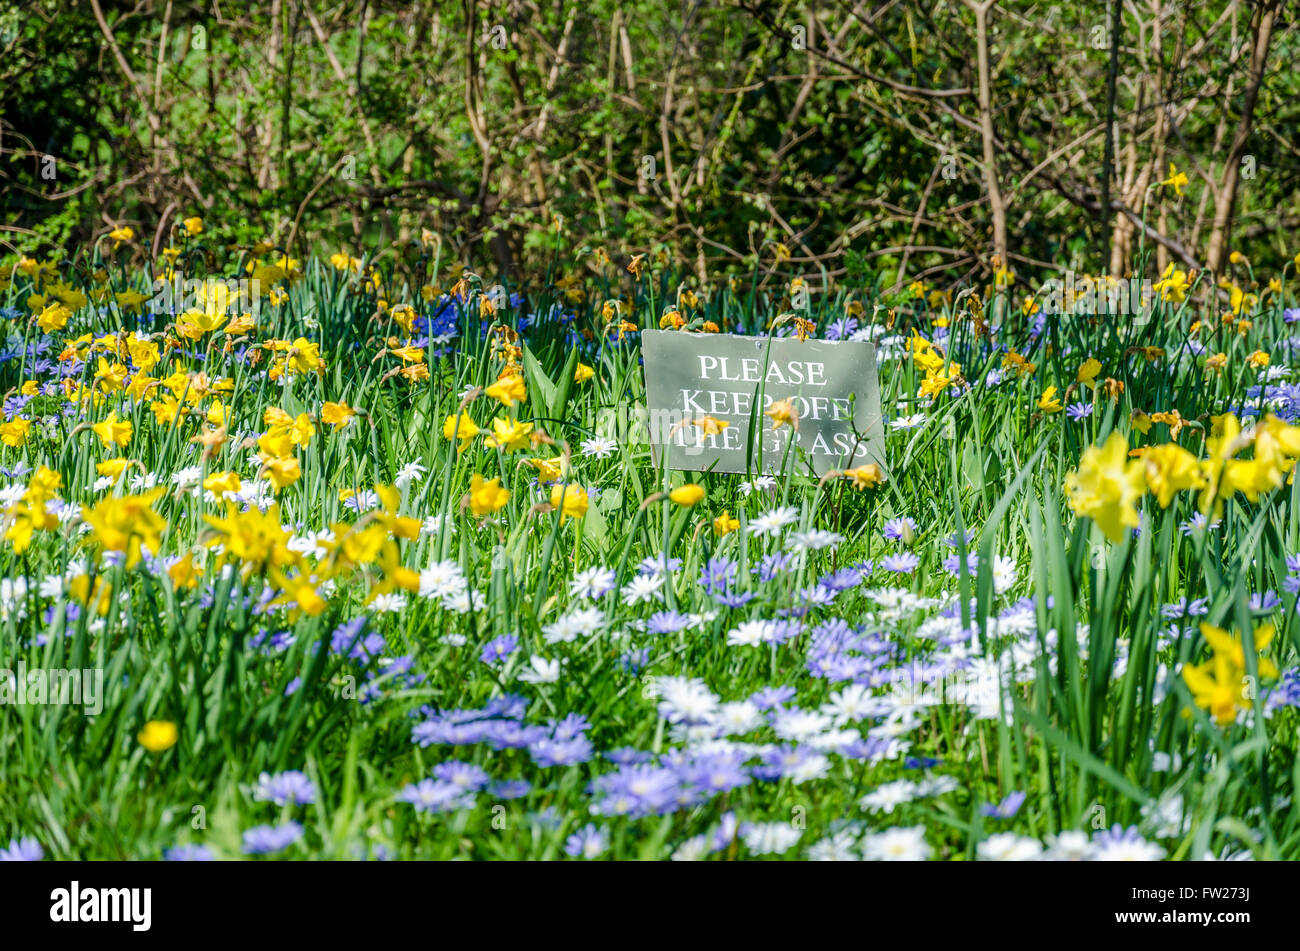 'PLEASE KEEP OFF THE GRASS' sign in spring wild flowers Stock Photo